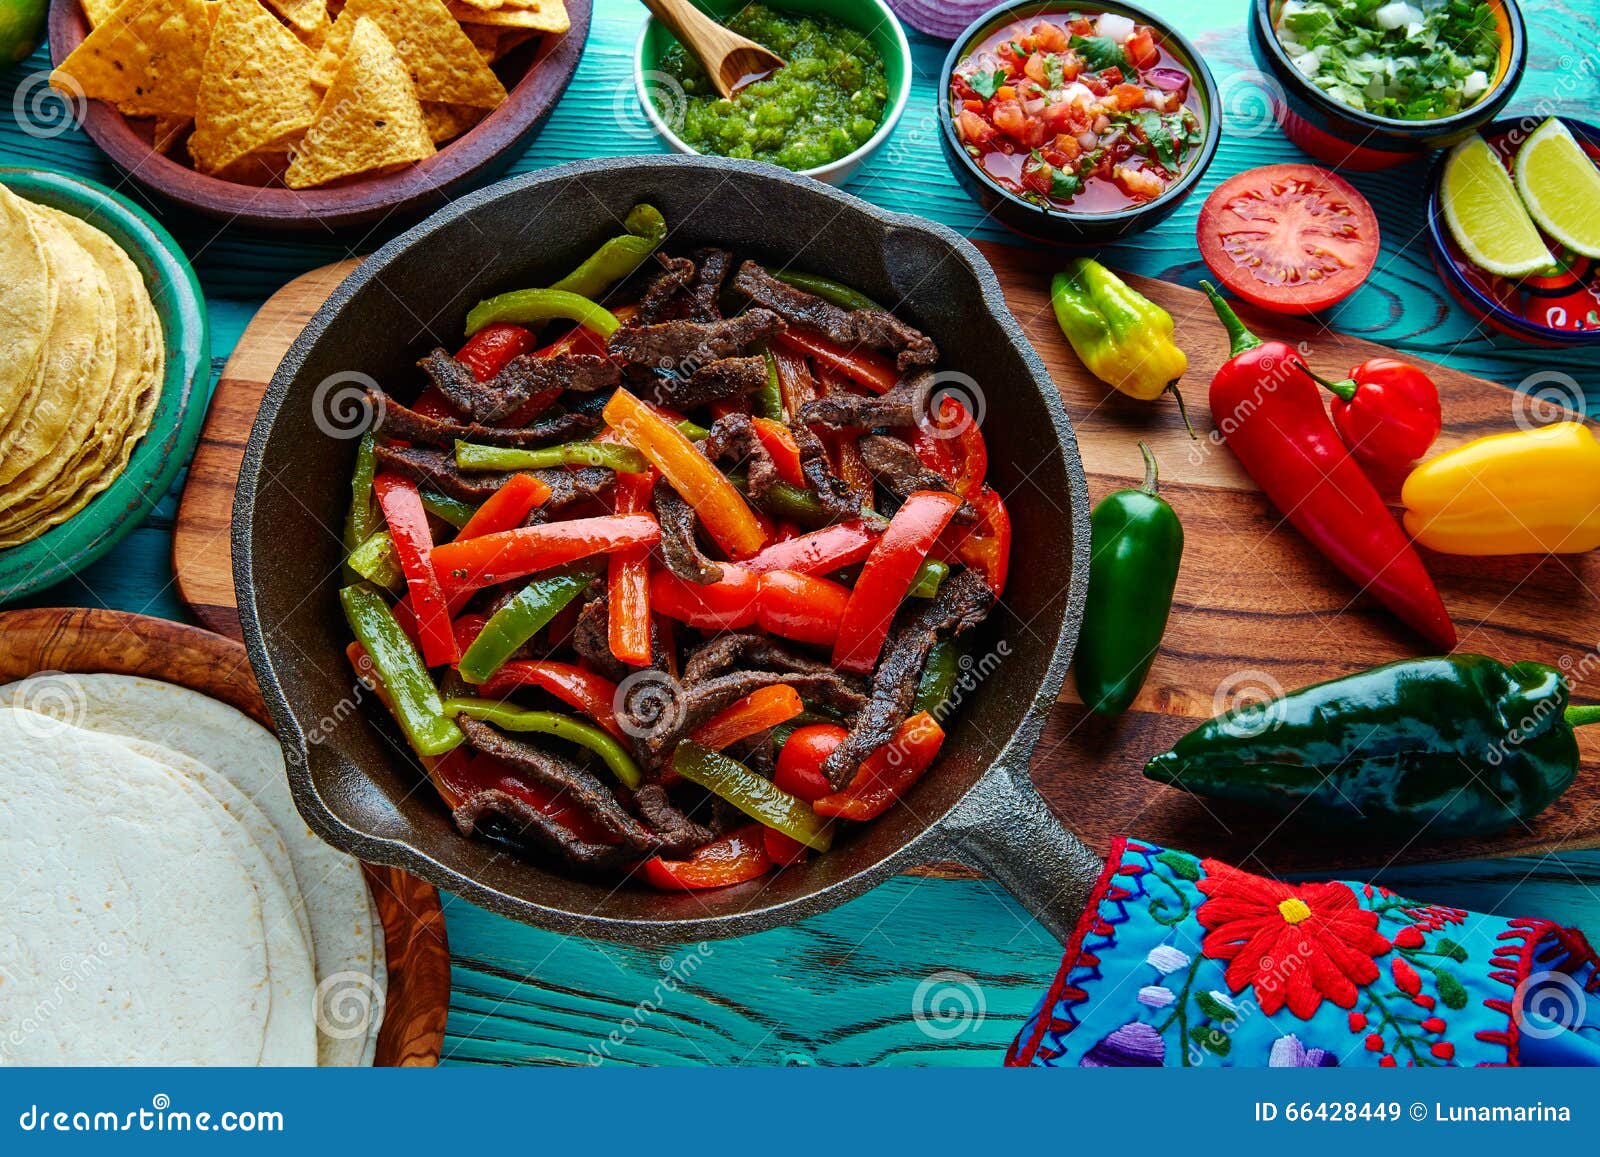 beef fajitas in a pan sauces chili and sides mexican